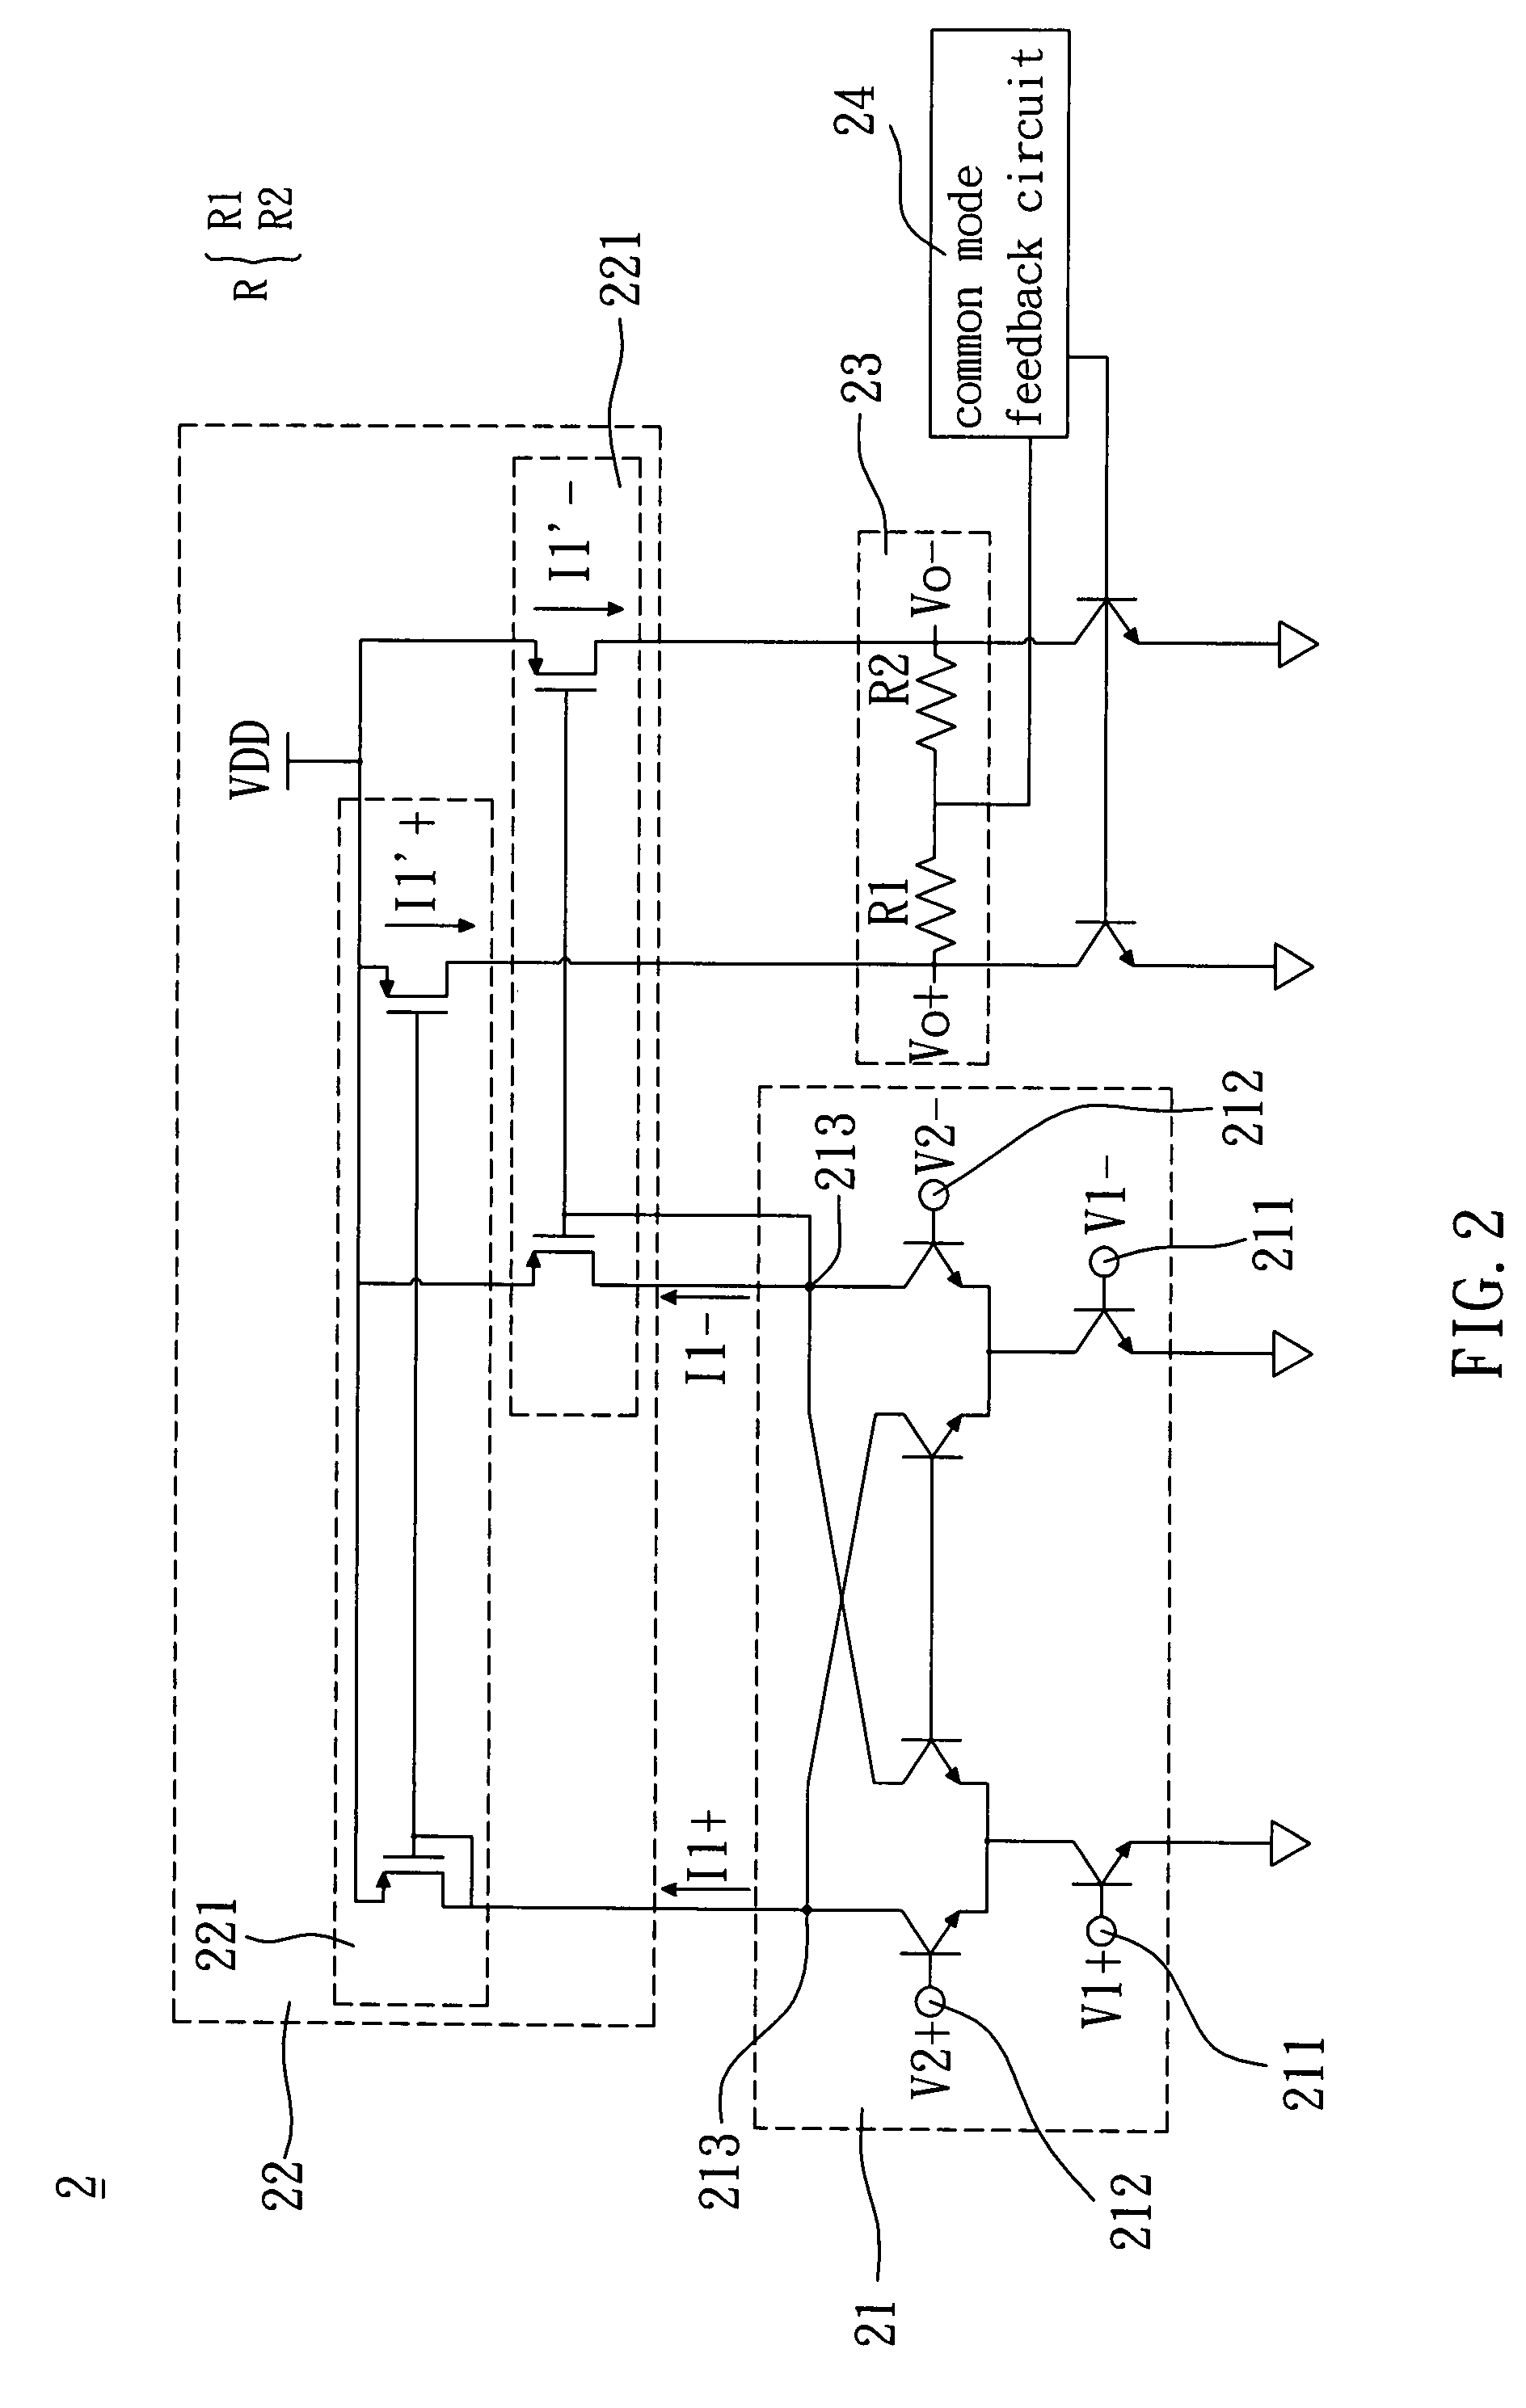 Conversion mixer with high impedance circuit